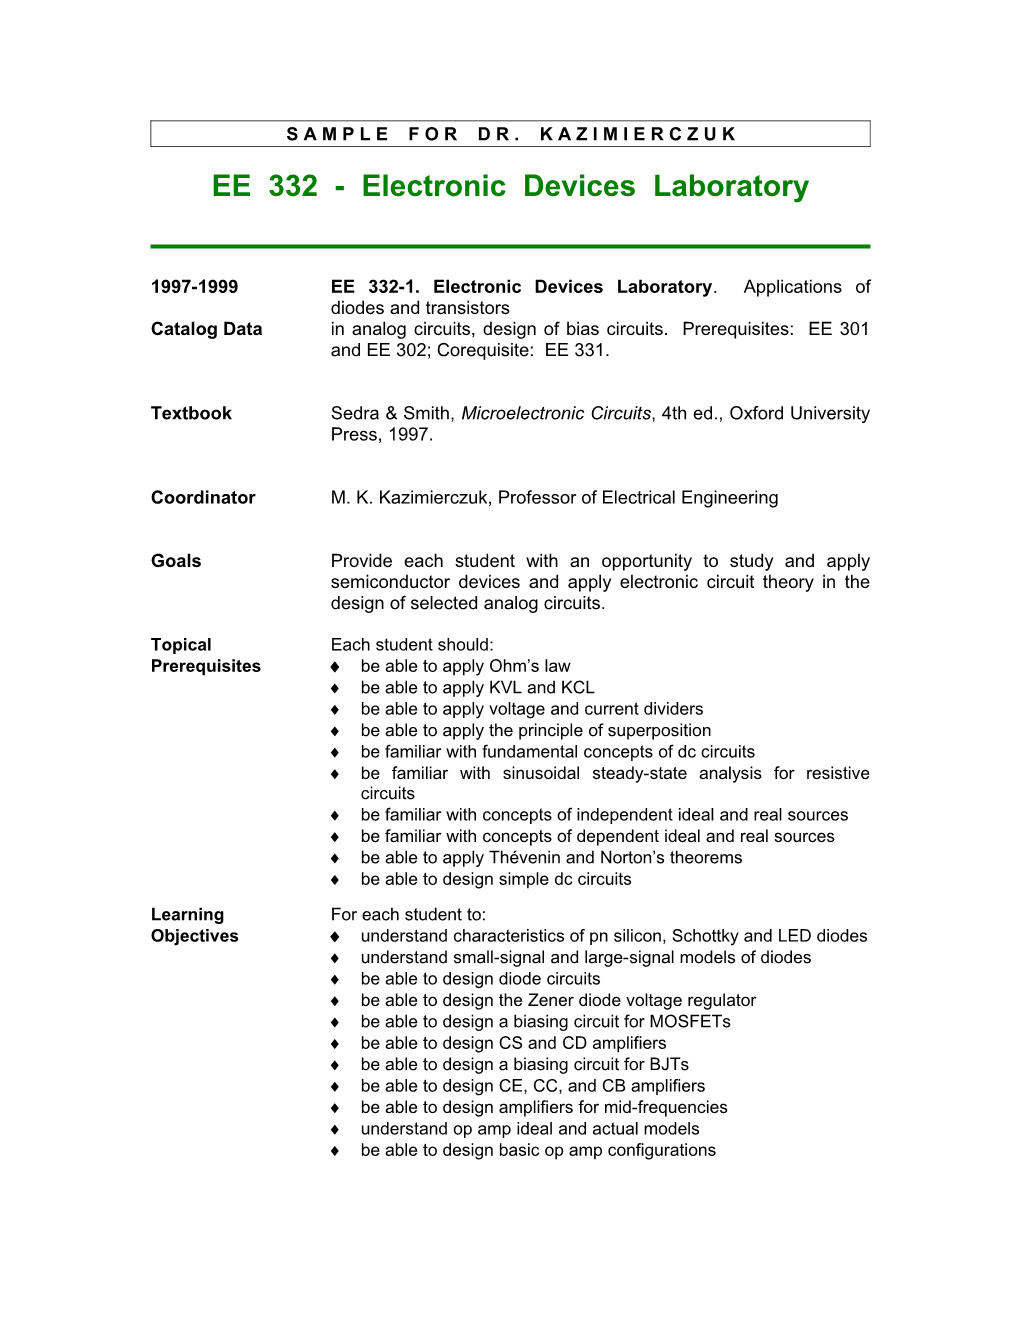 EE 332 - Electronic Devices Laboratory